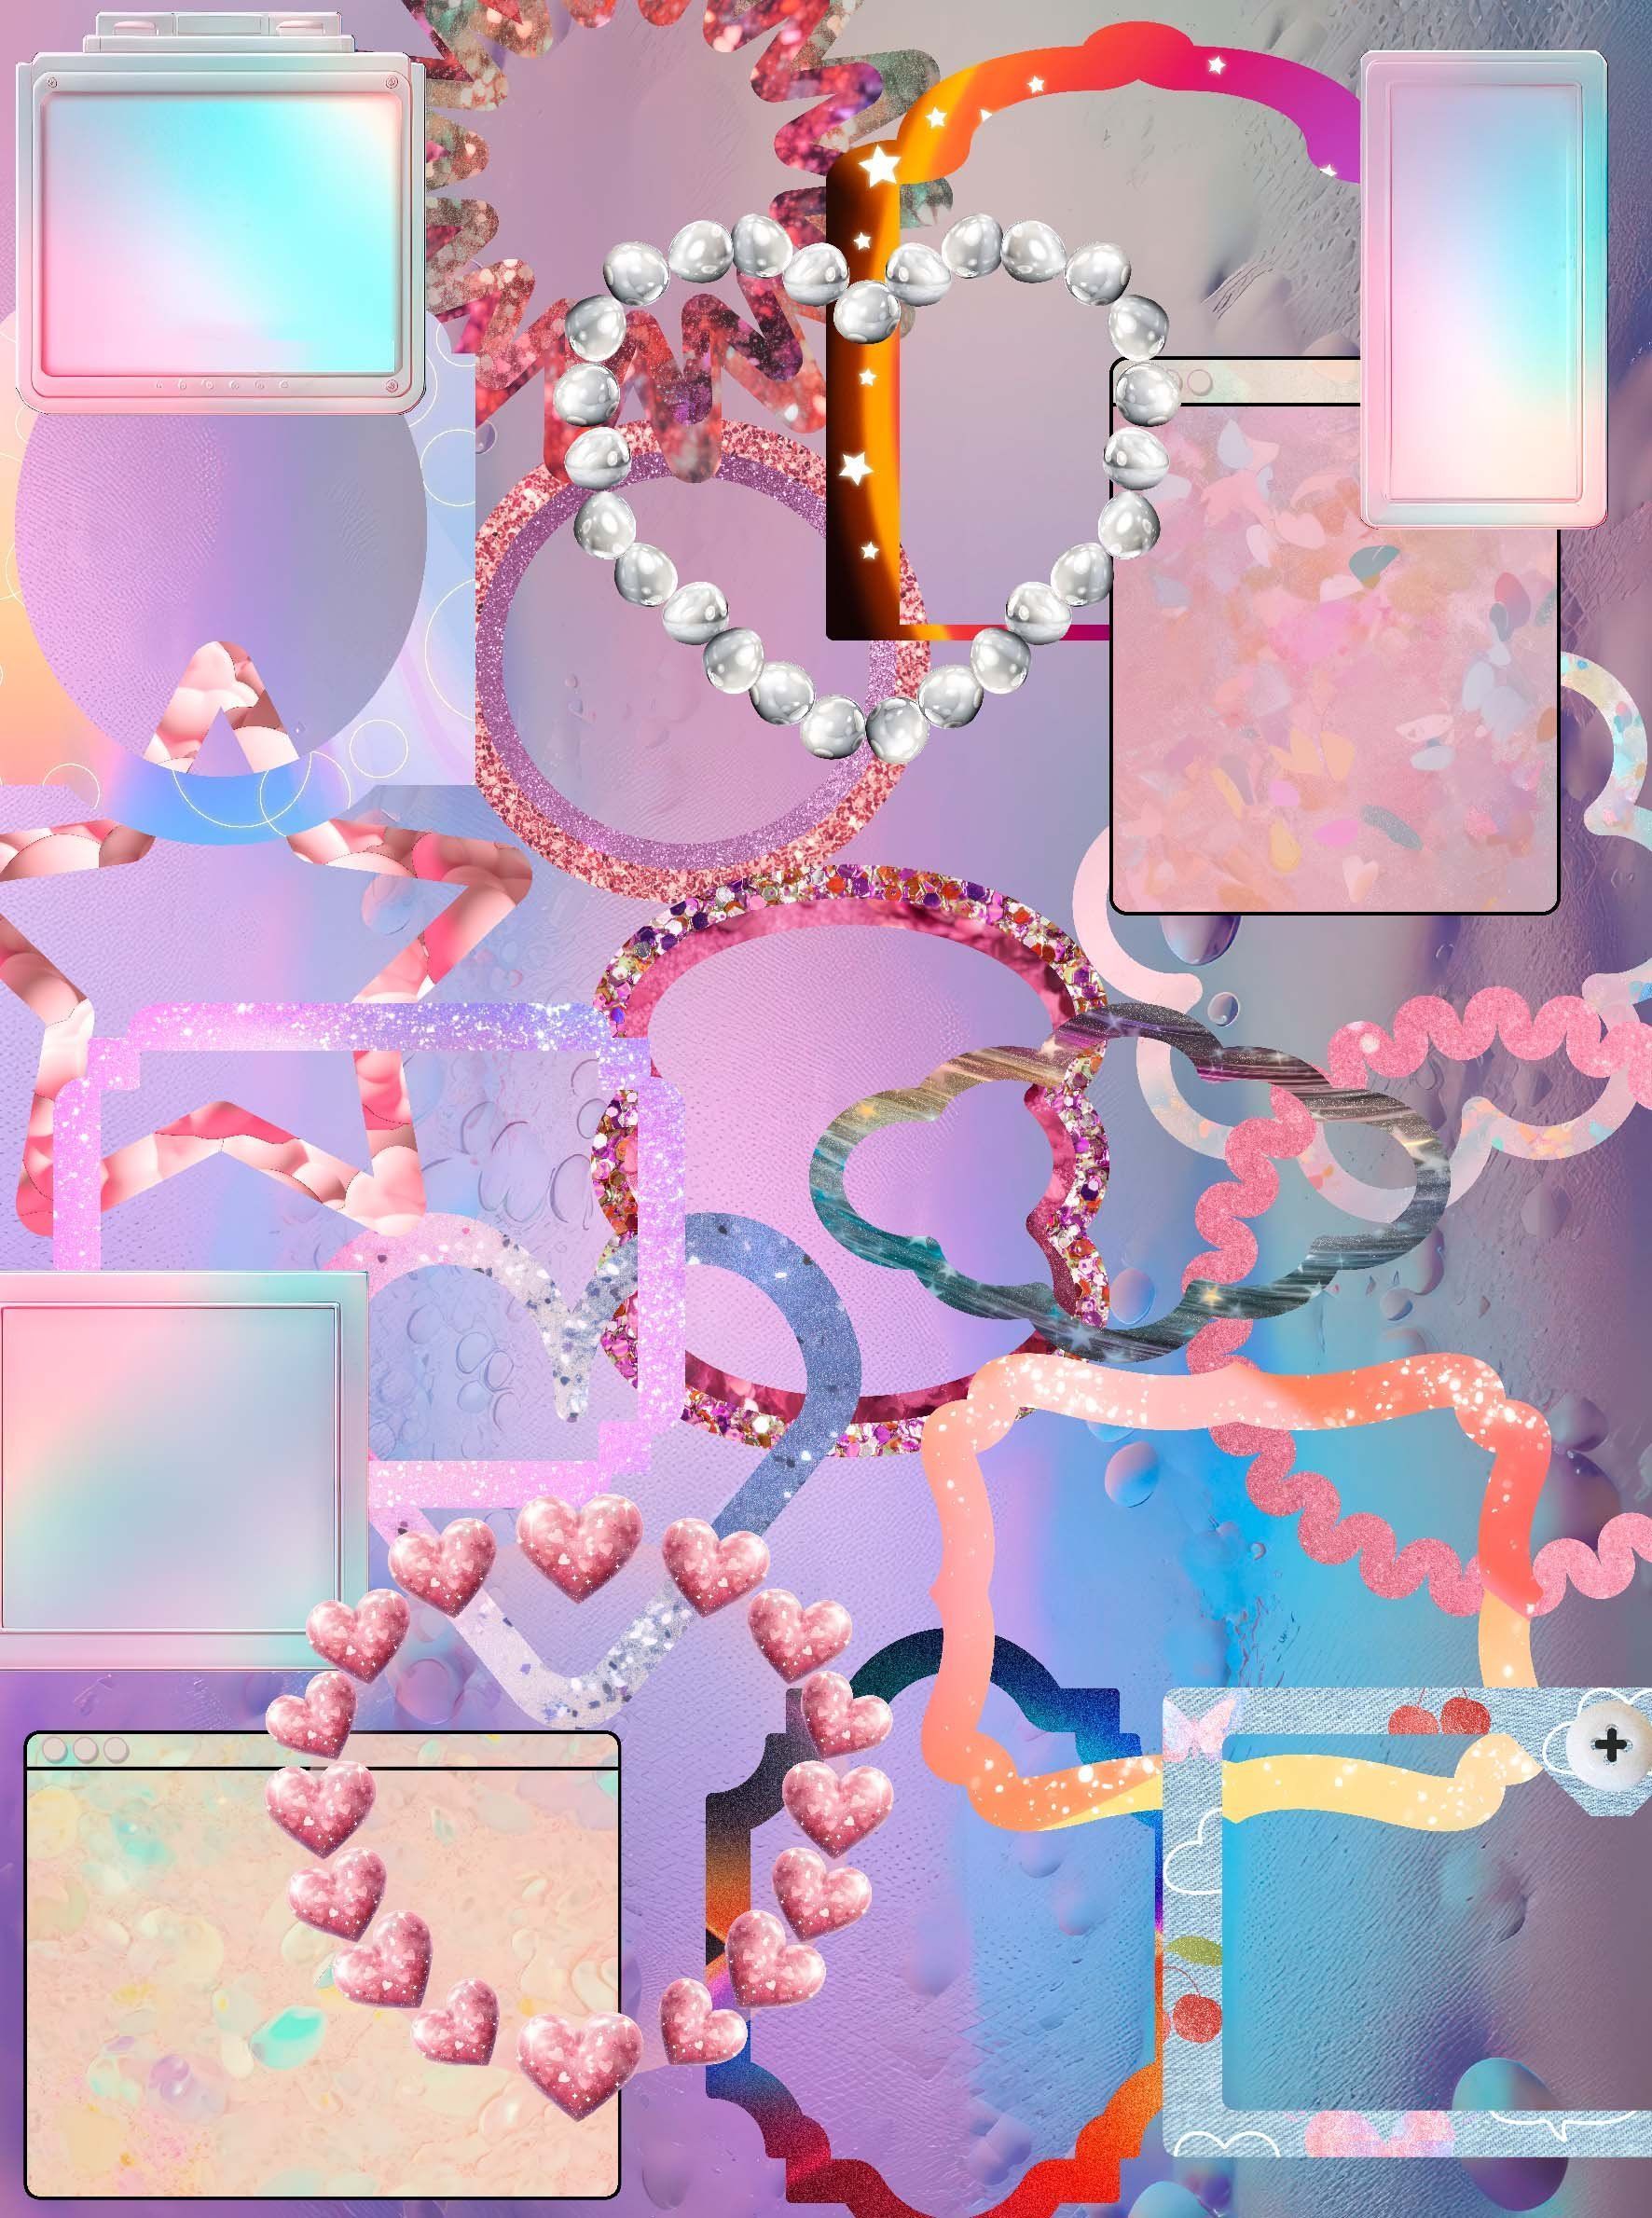 A digital collage featuring a heart made out of pink and white pearls, pink and purple ribbons, and pink and blue sparkly squares. - 2000s